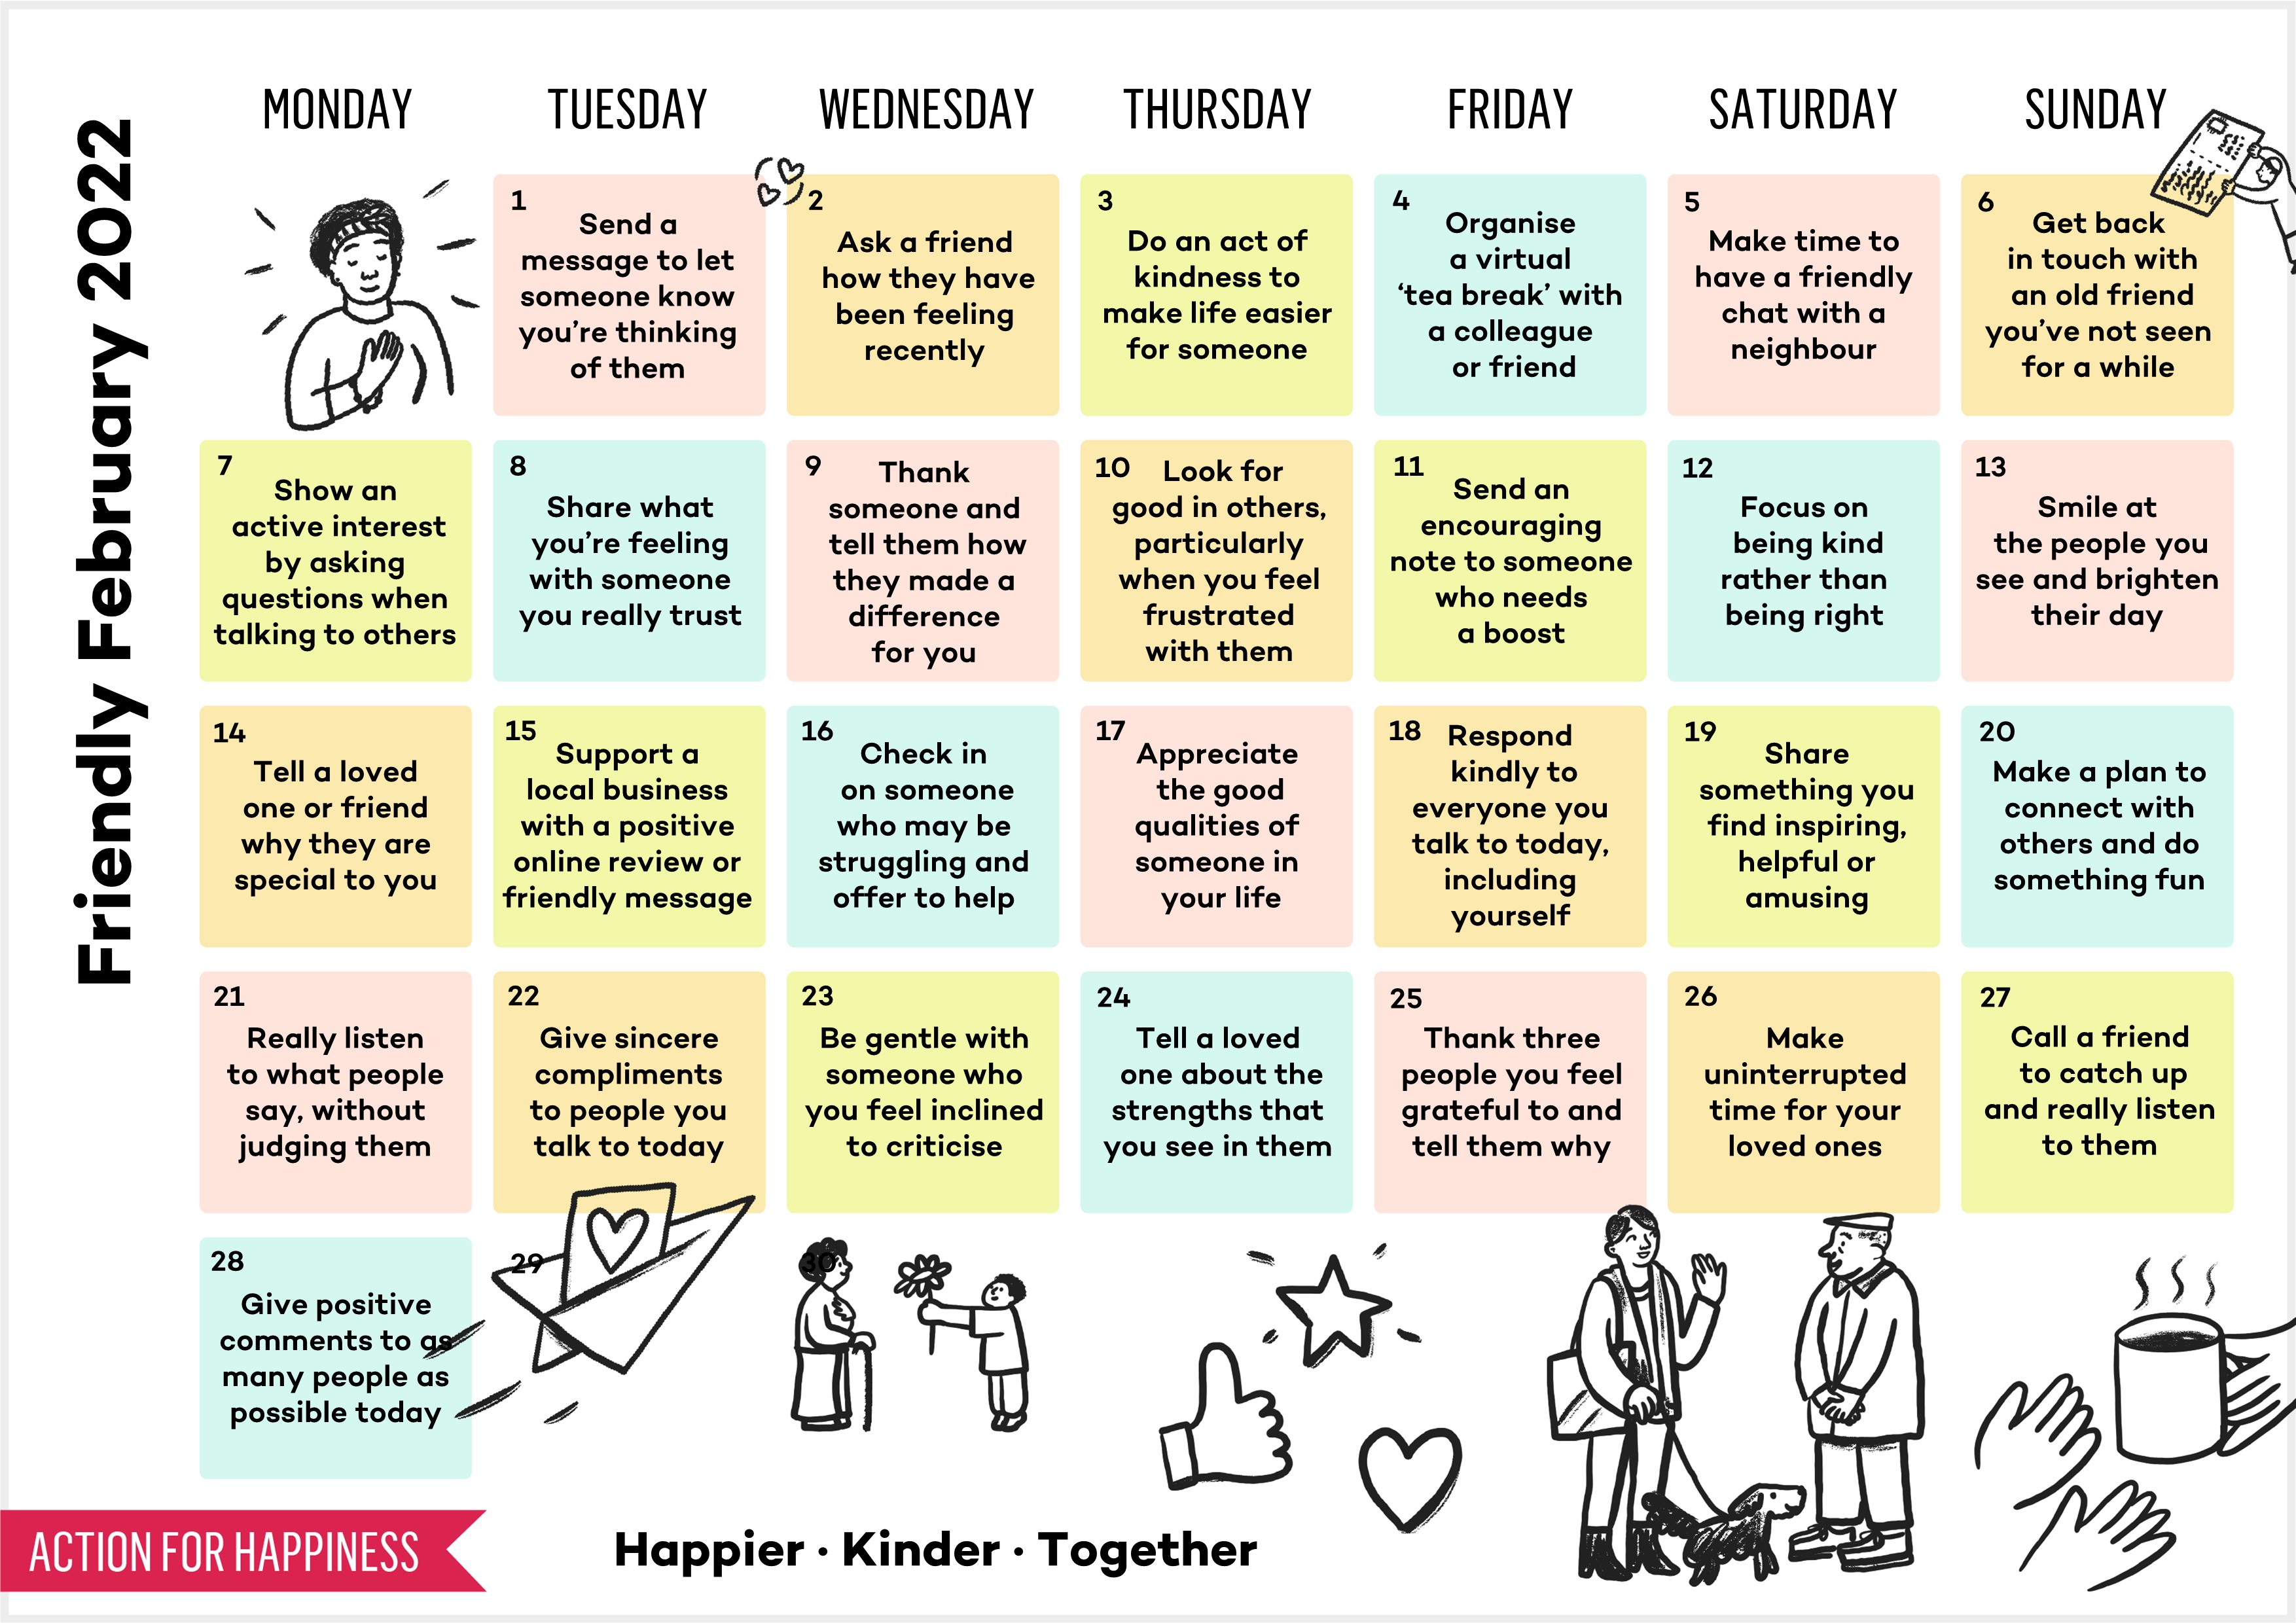 Action for Happiness Friendly February calendar